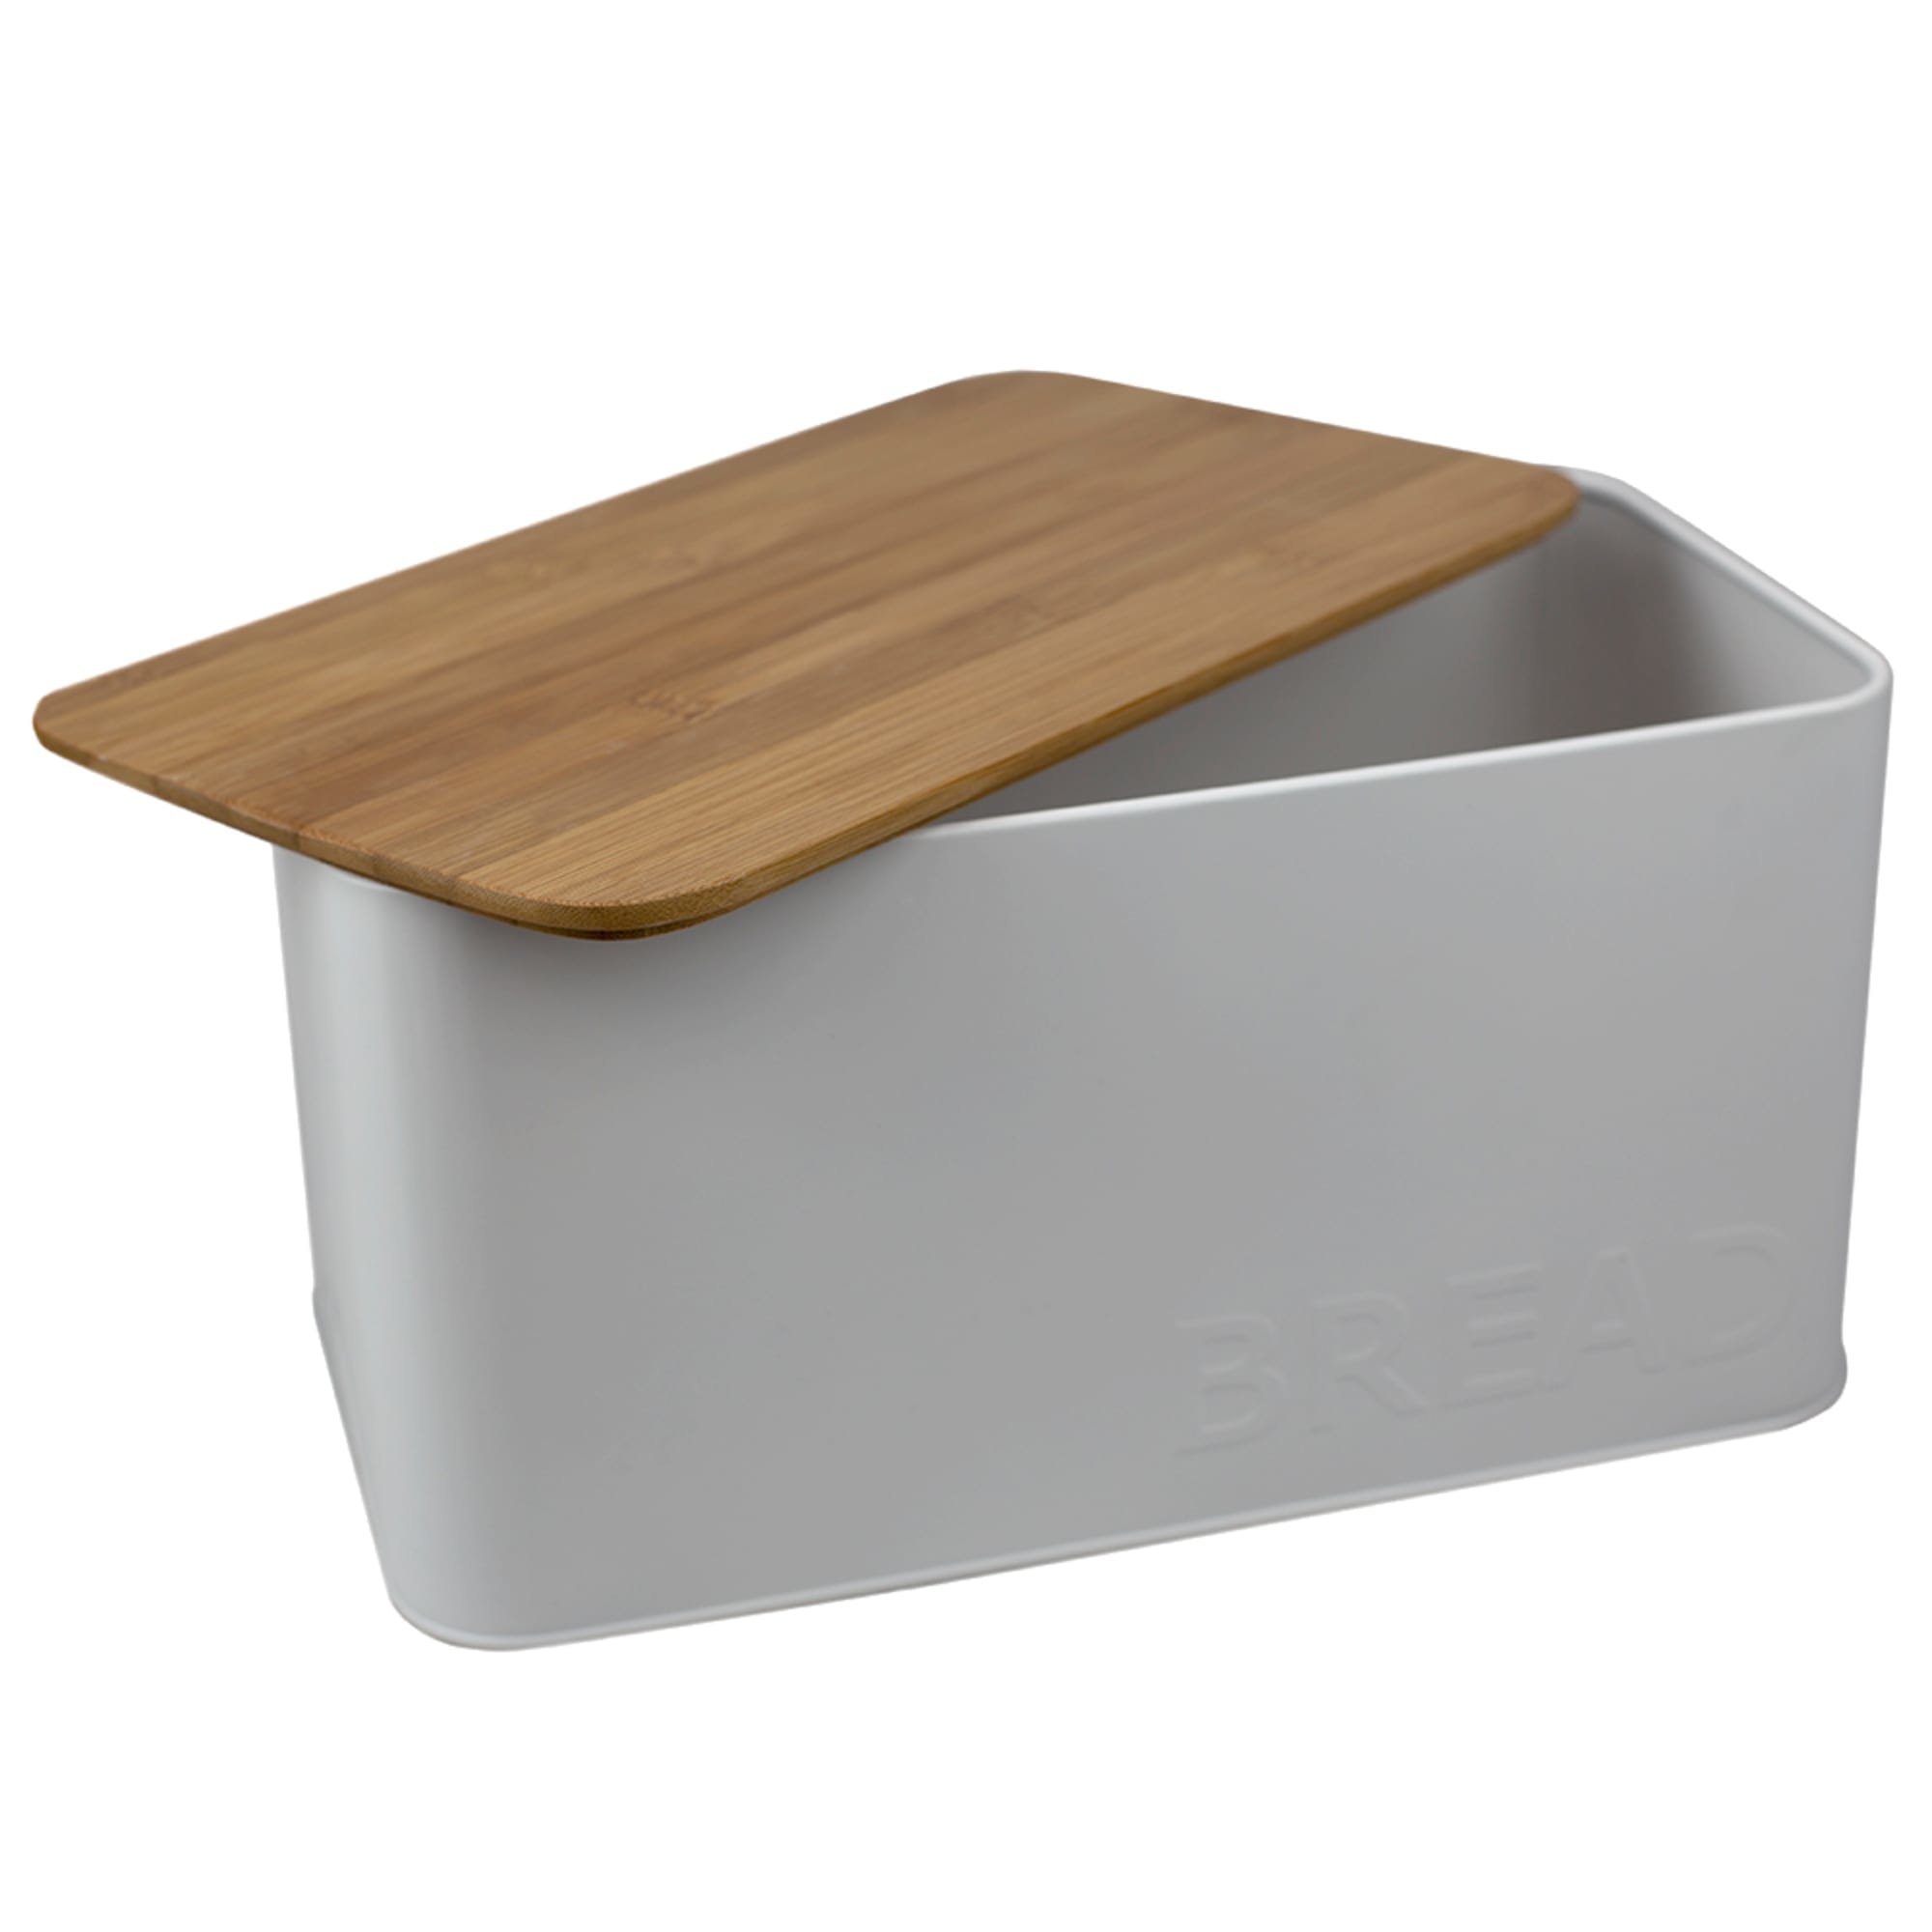 Home Basics Tin Bread Box  with Bamboo Top, White $15.00 EACH, CASE PACK OF 8